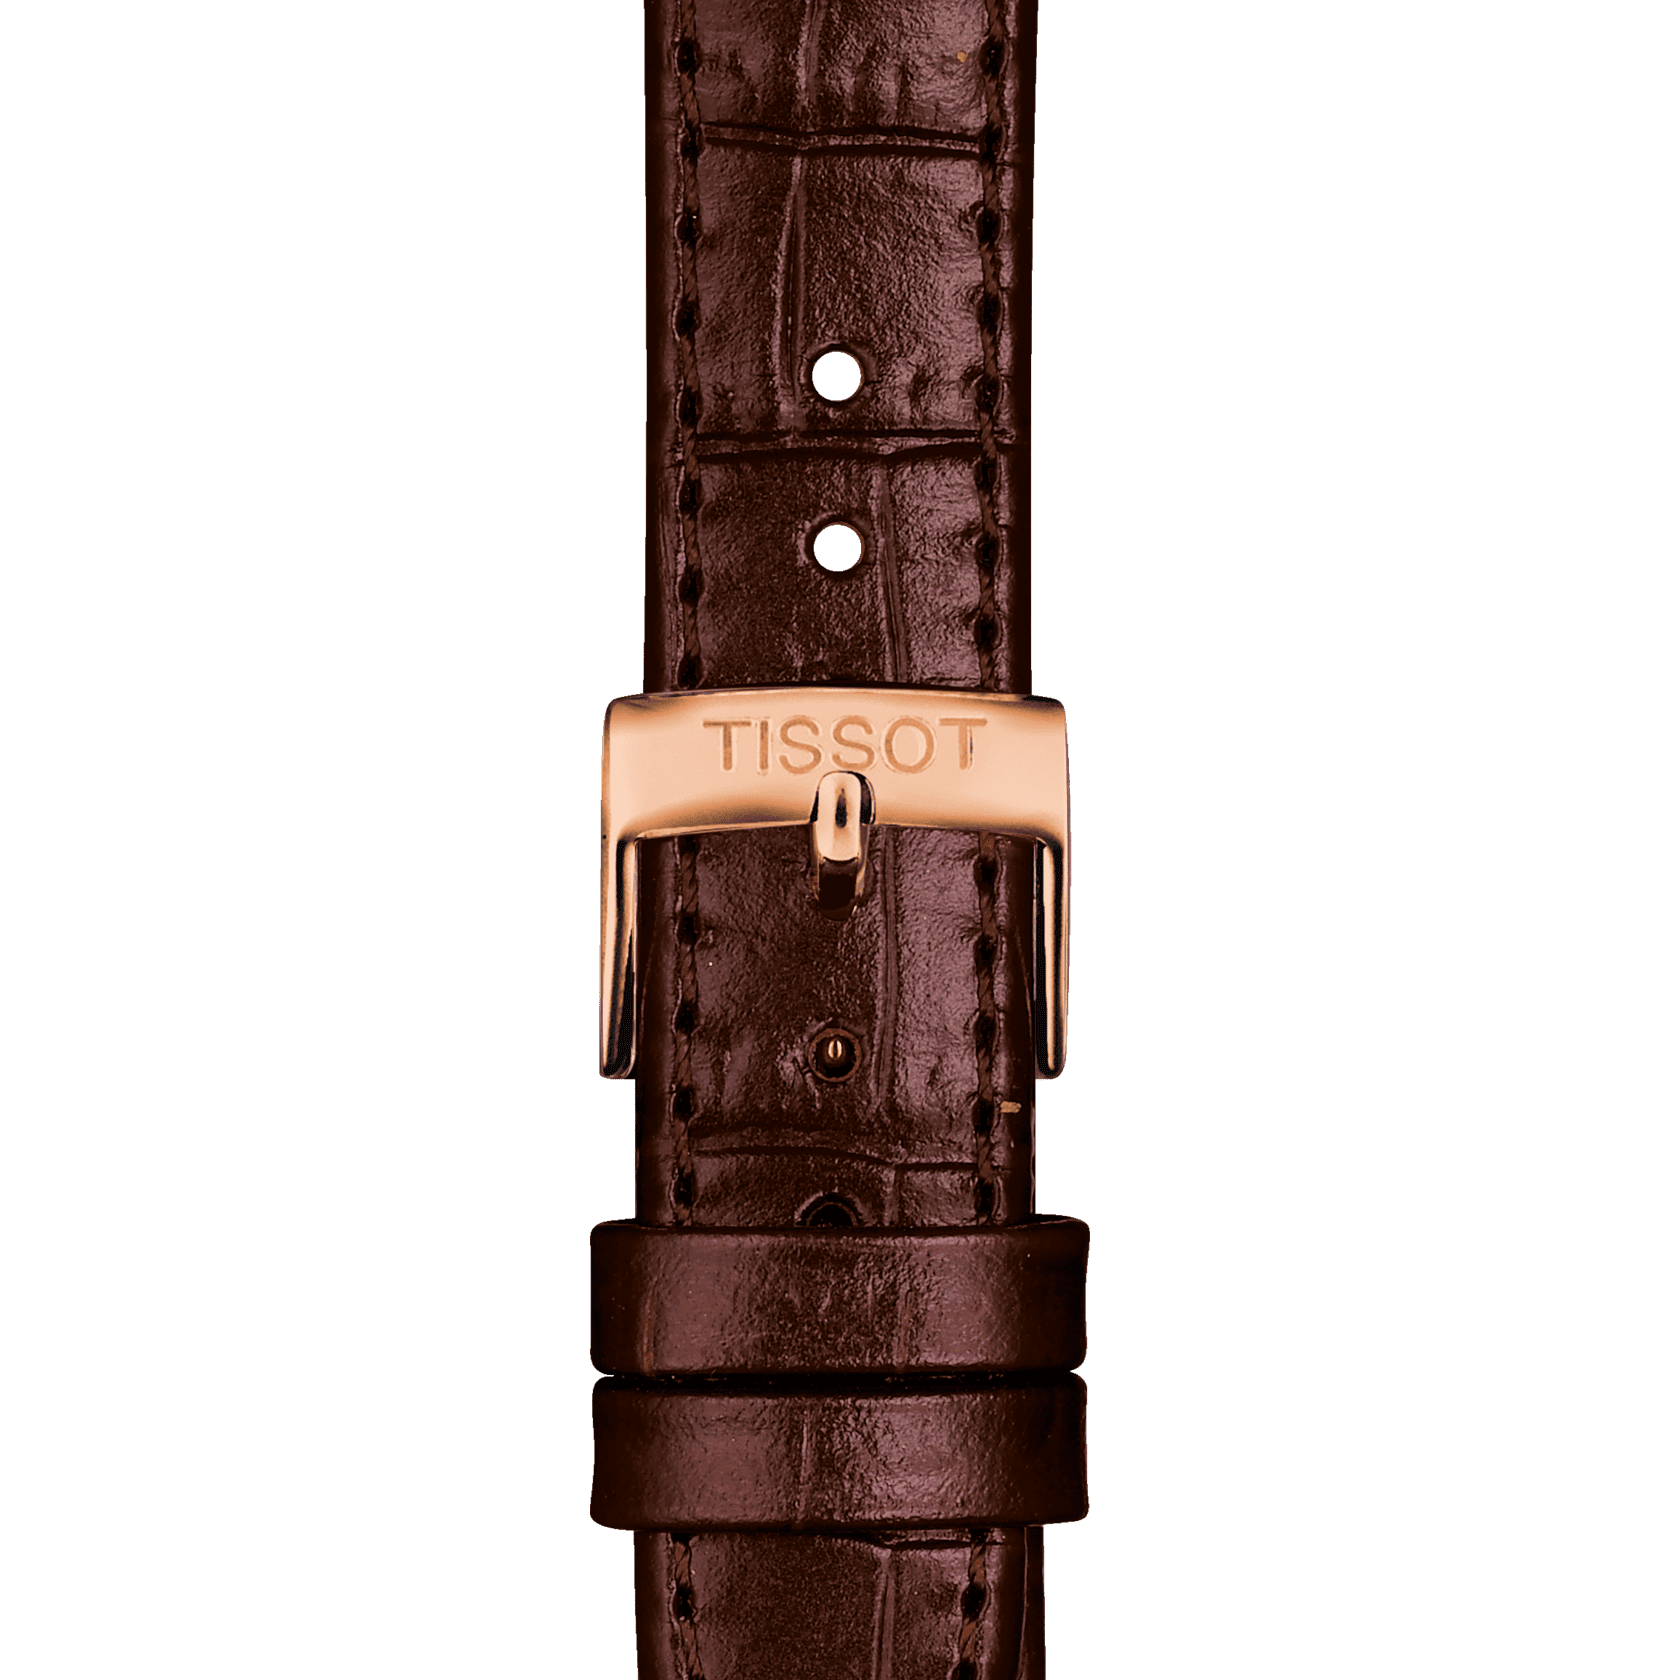 Tissot official brown leather strap lugs 15 mm